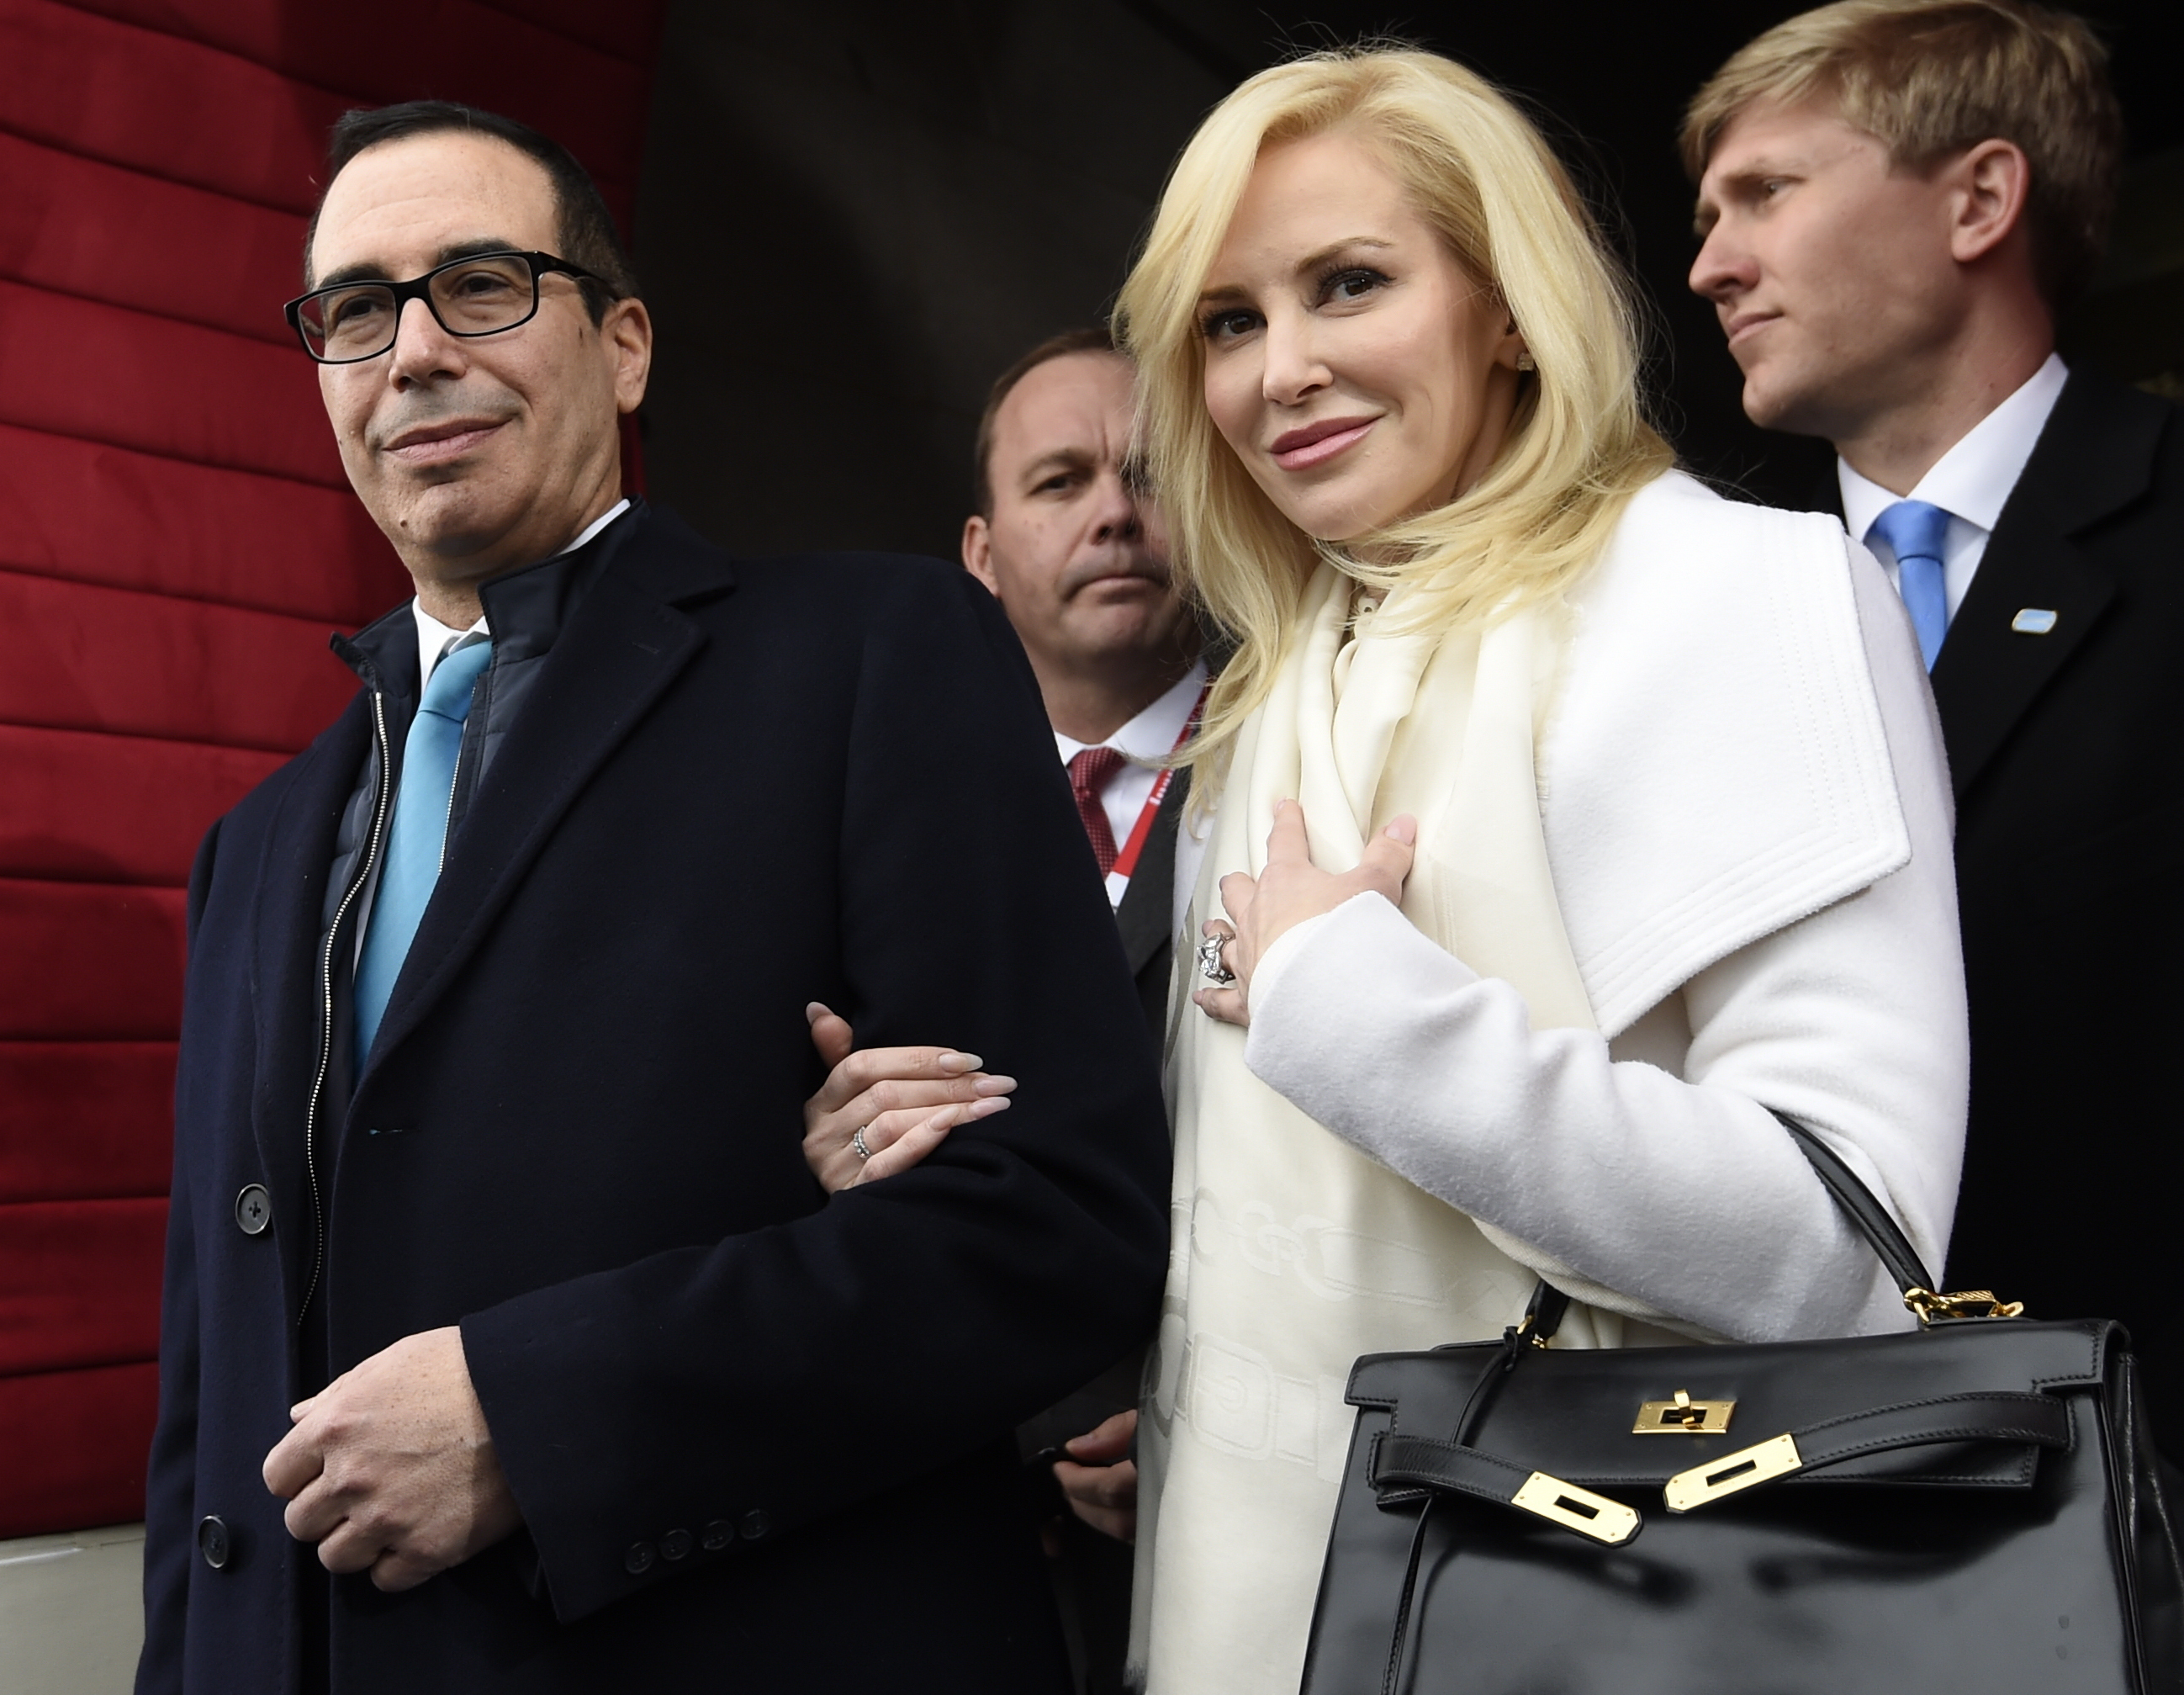 Here’s How Much Louise Linton’s Outfit in That Viral Instagram Post Costs